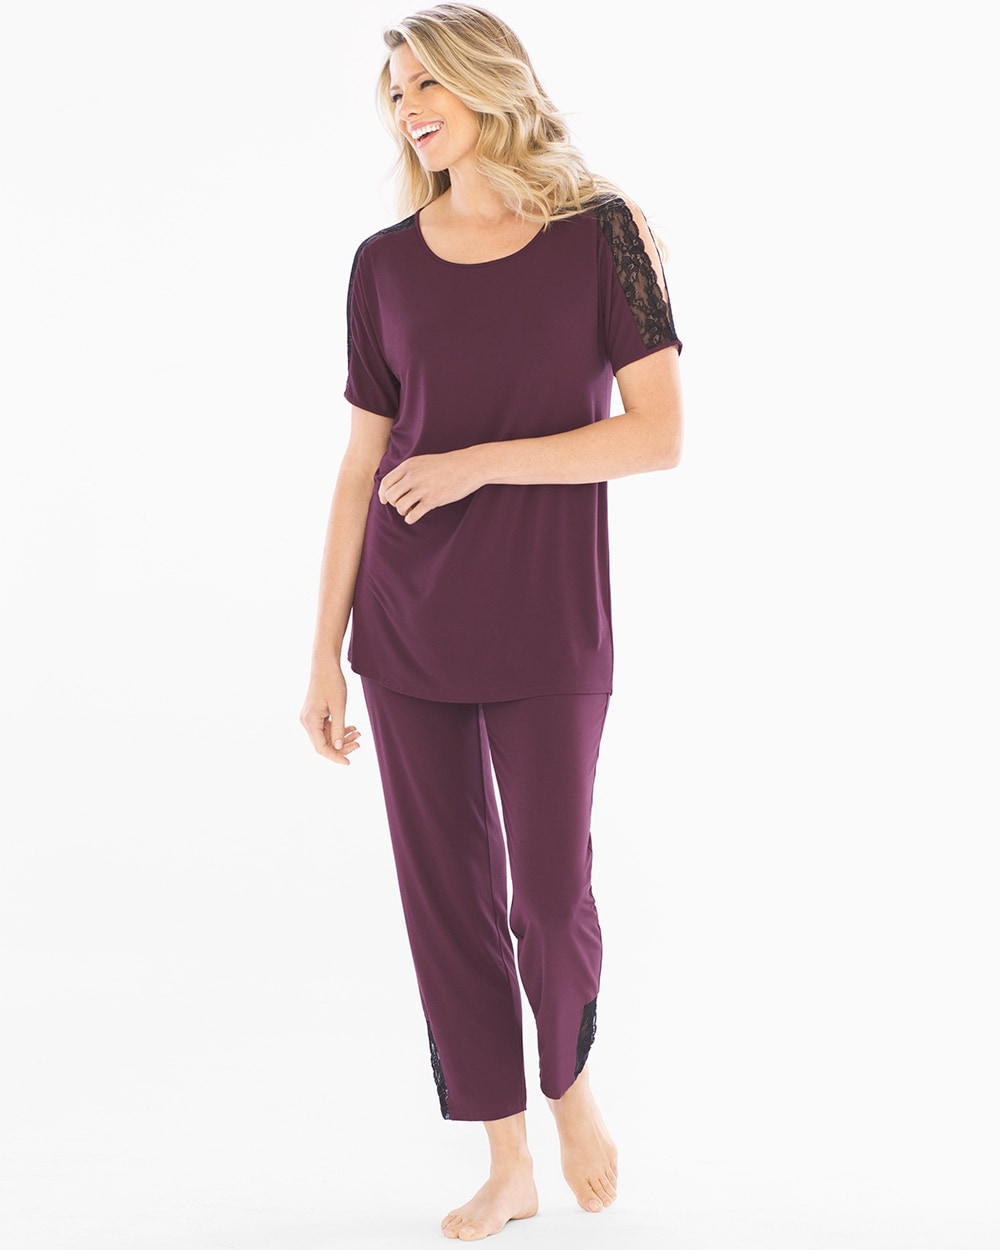 Cool Nights Lace Trim Short Sleeve Tee and Ankle Pants Pajama Set Merlot